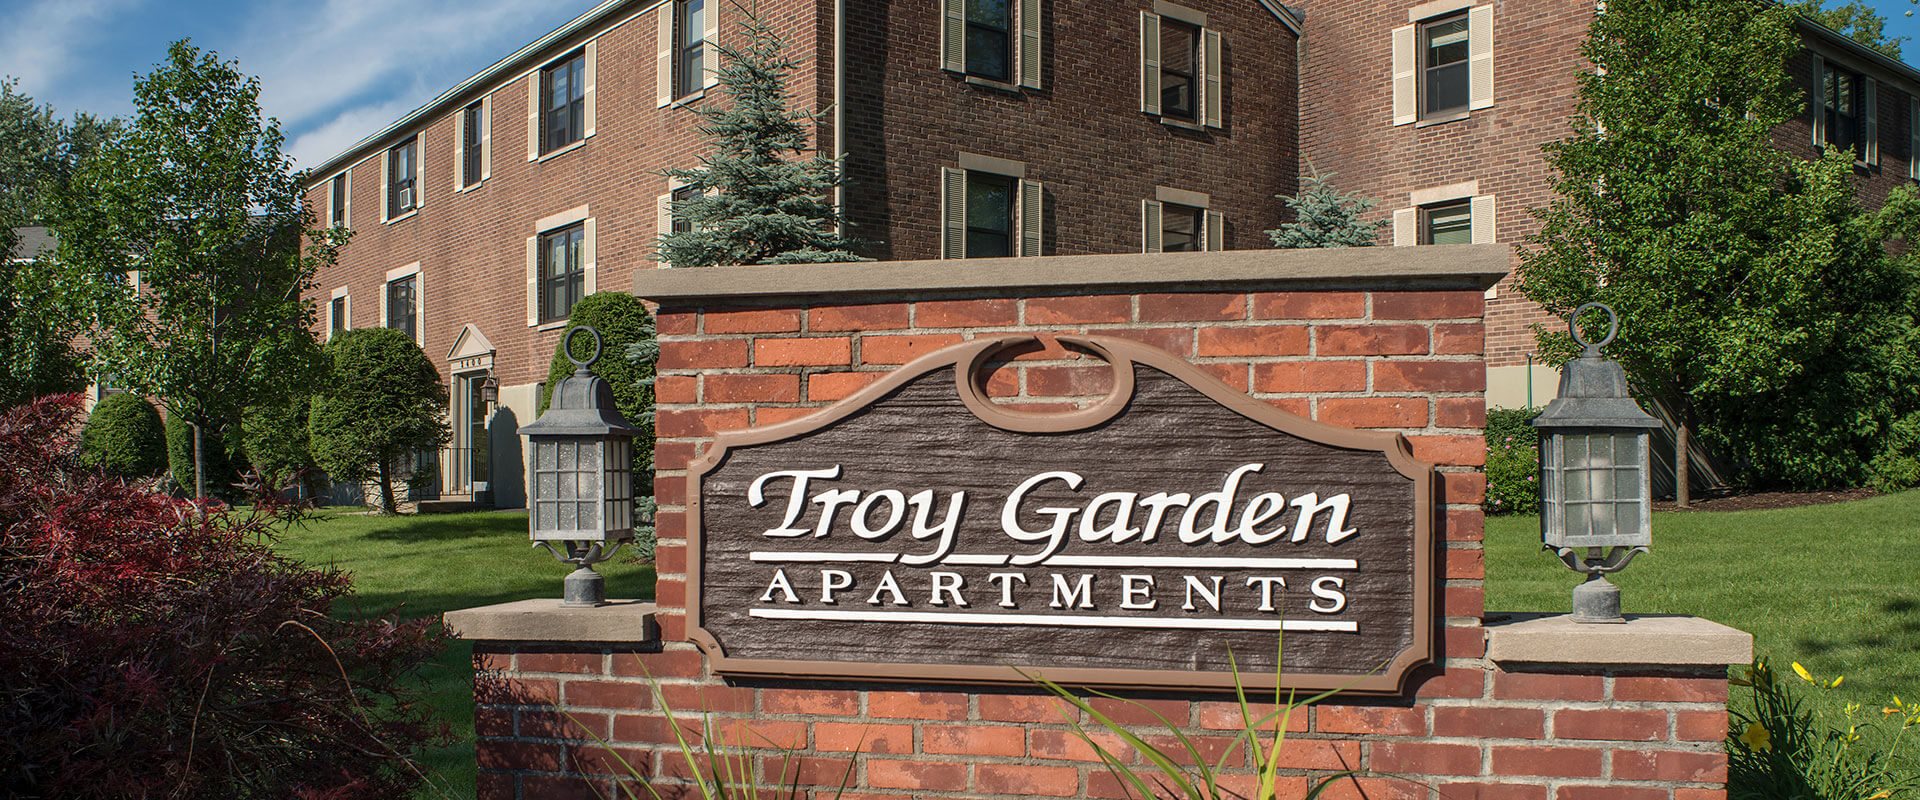 Troy Garden Apartments Apartments In Troy Ny